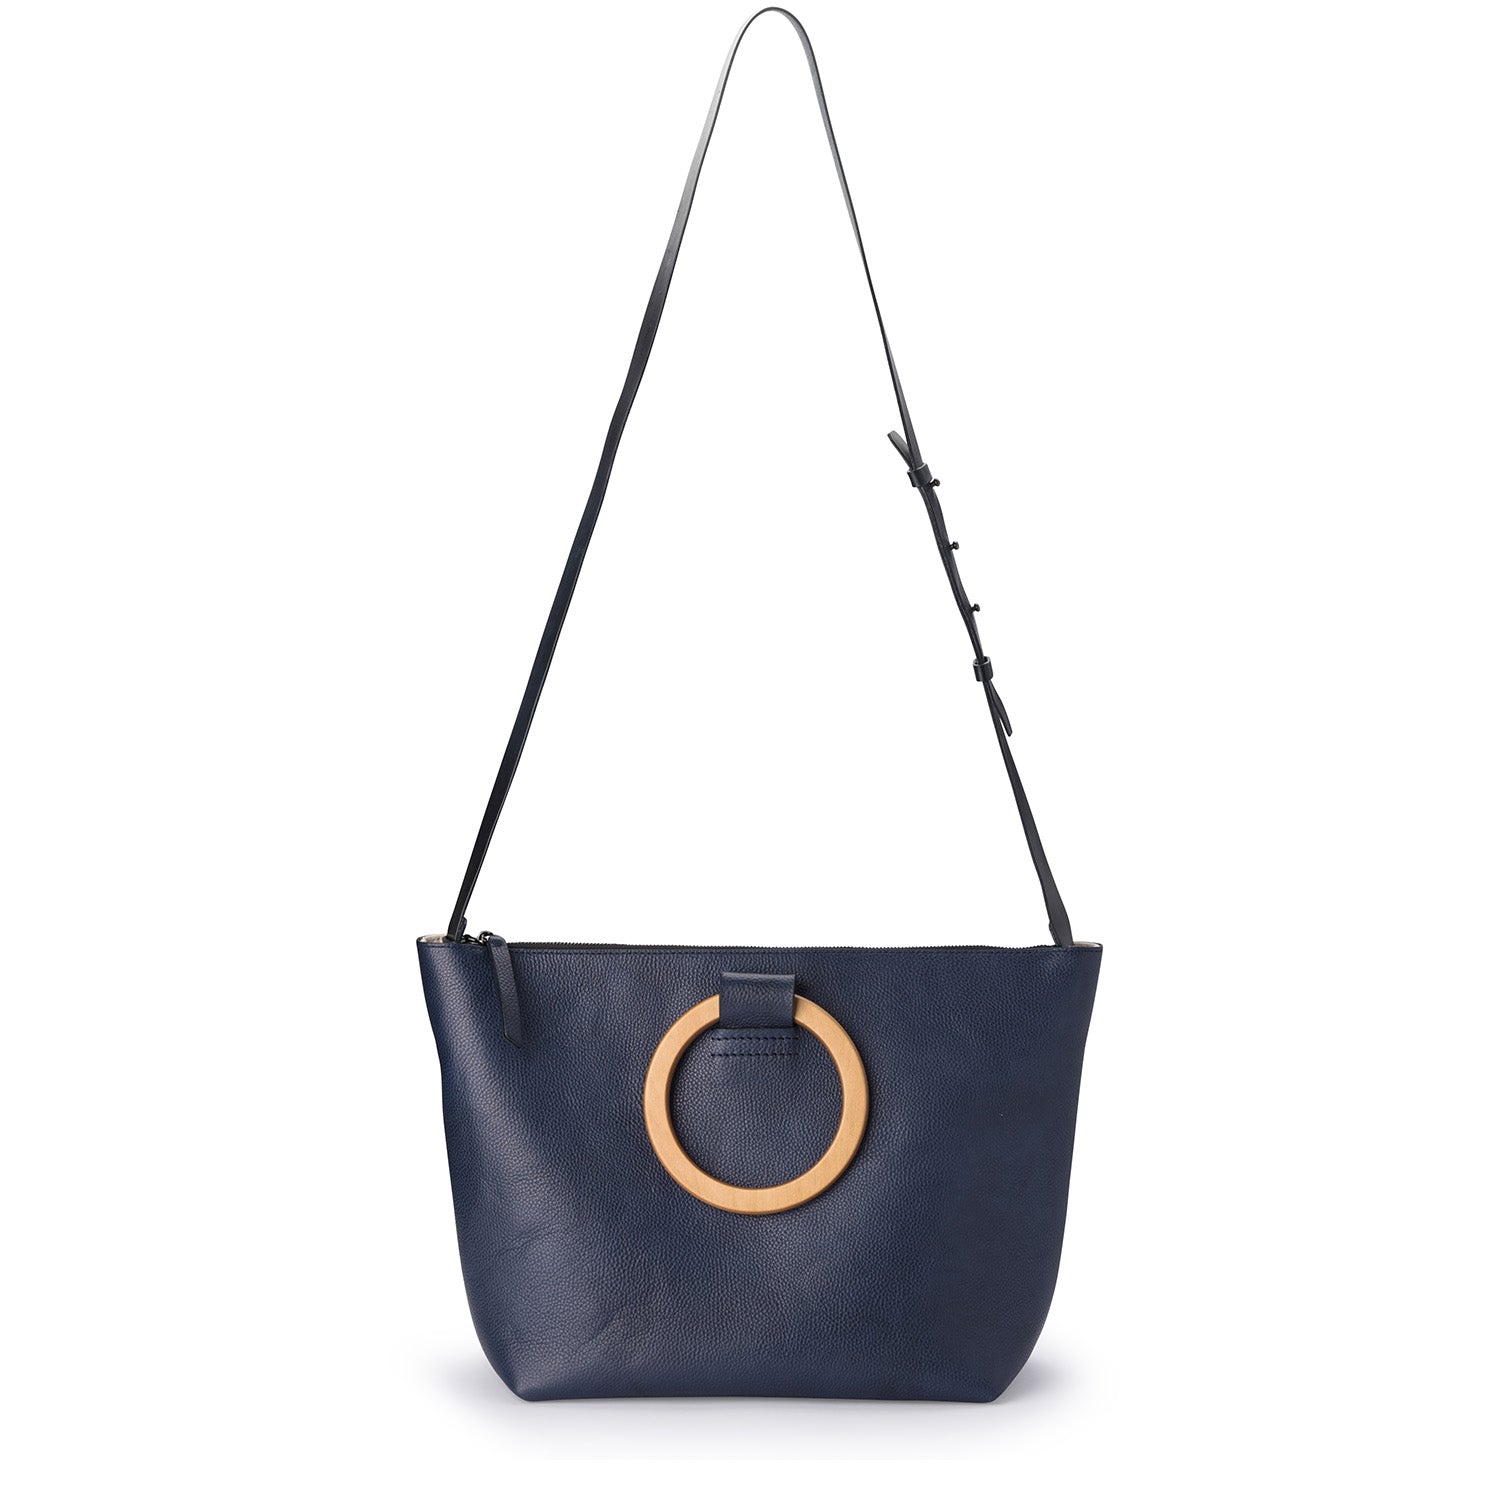 Small Blue Suede Bag, Navy Small Tote Bag, Blue Leather Handbag - Yahoo  Shopping